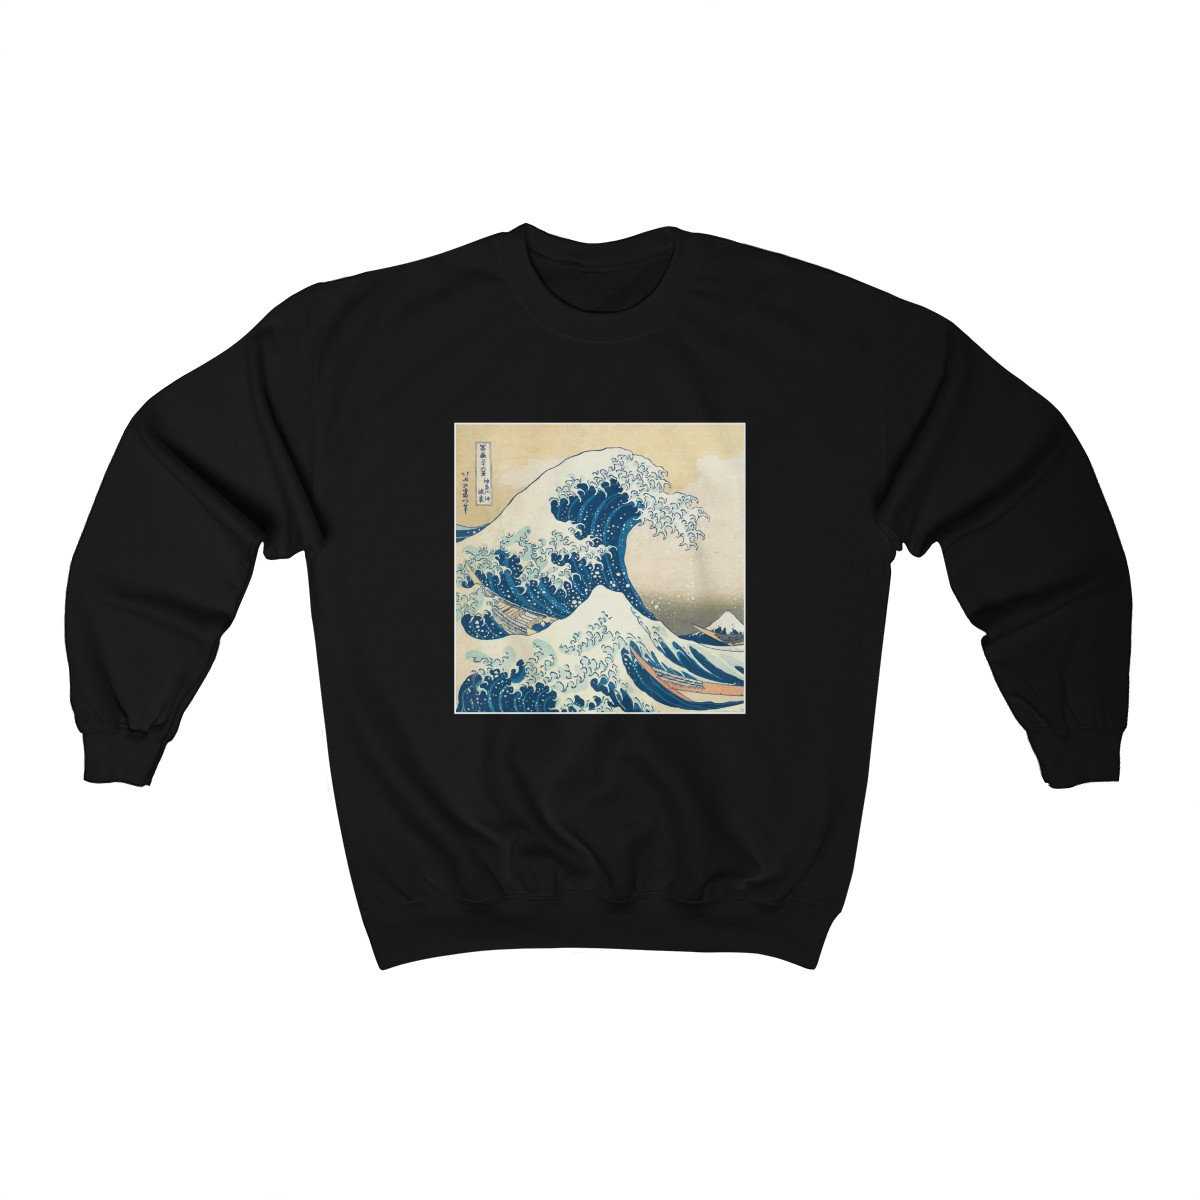 the great wave hoodie